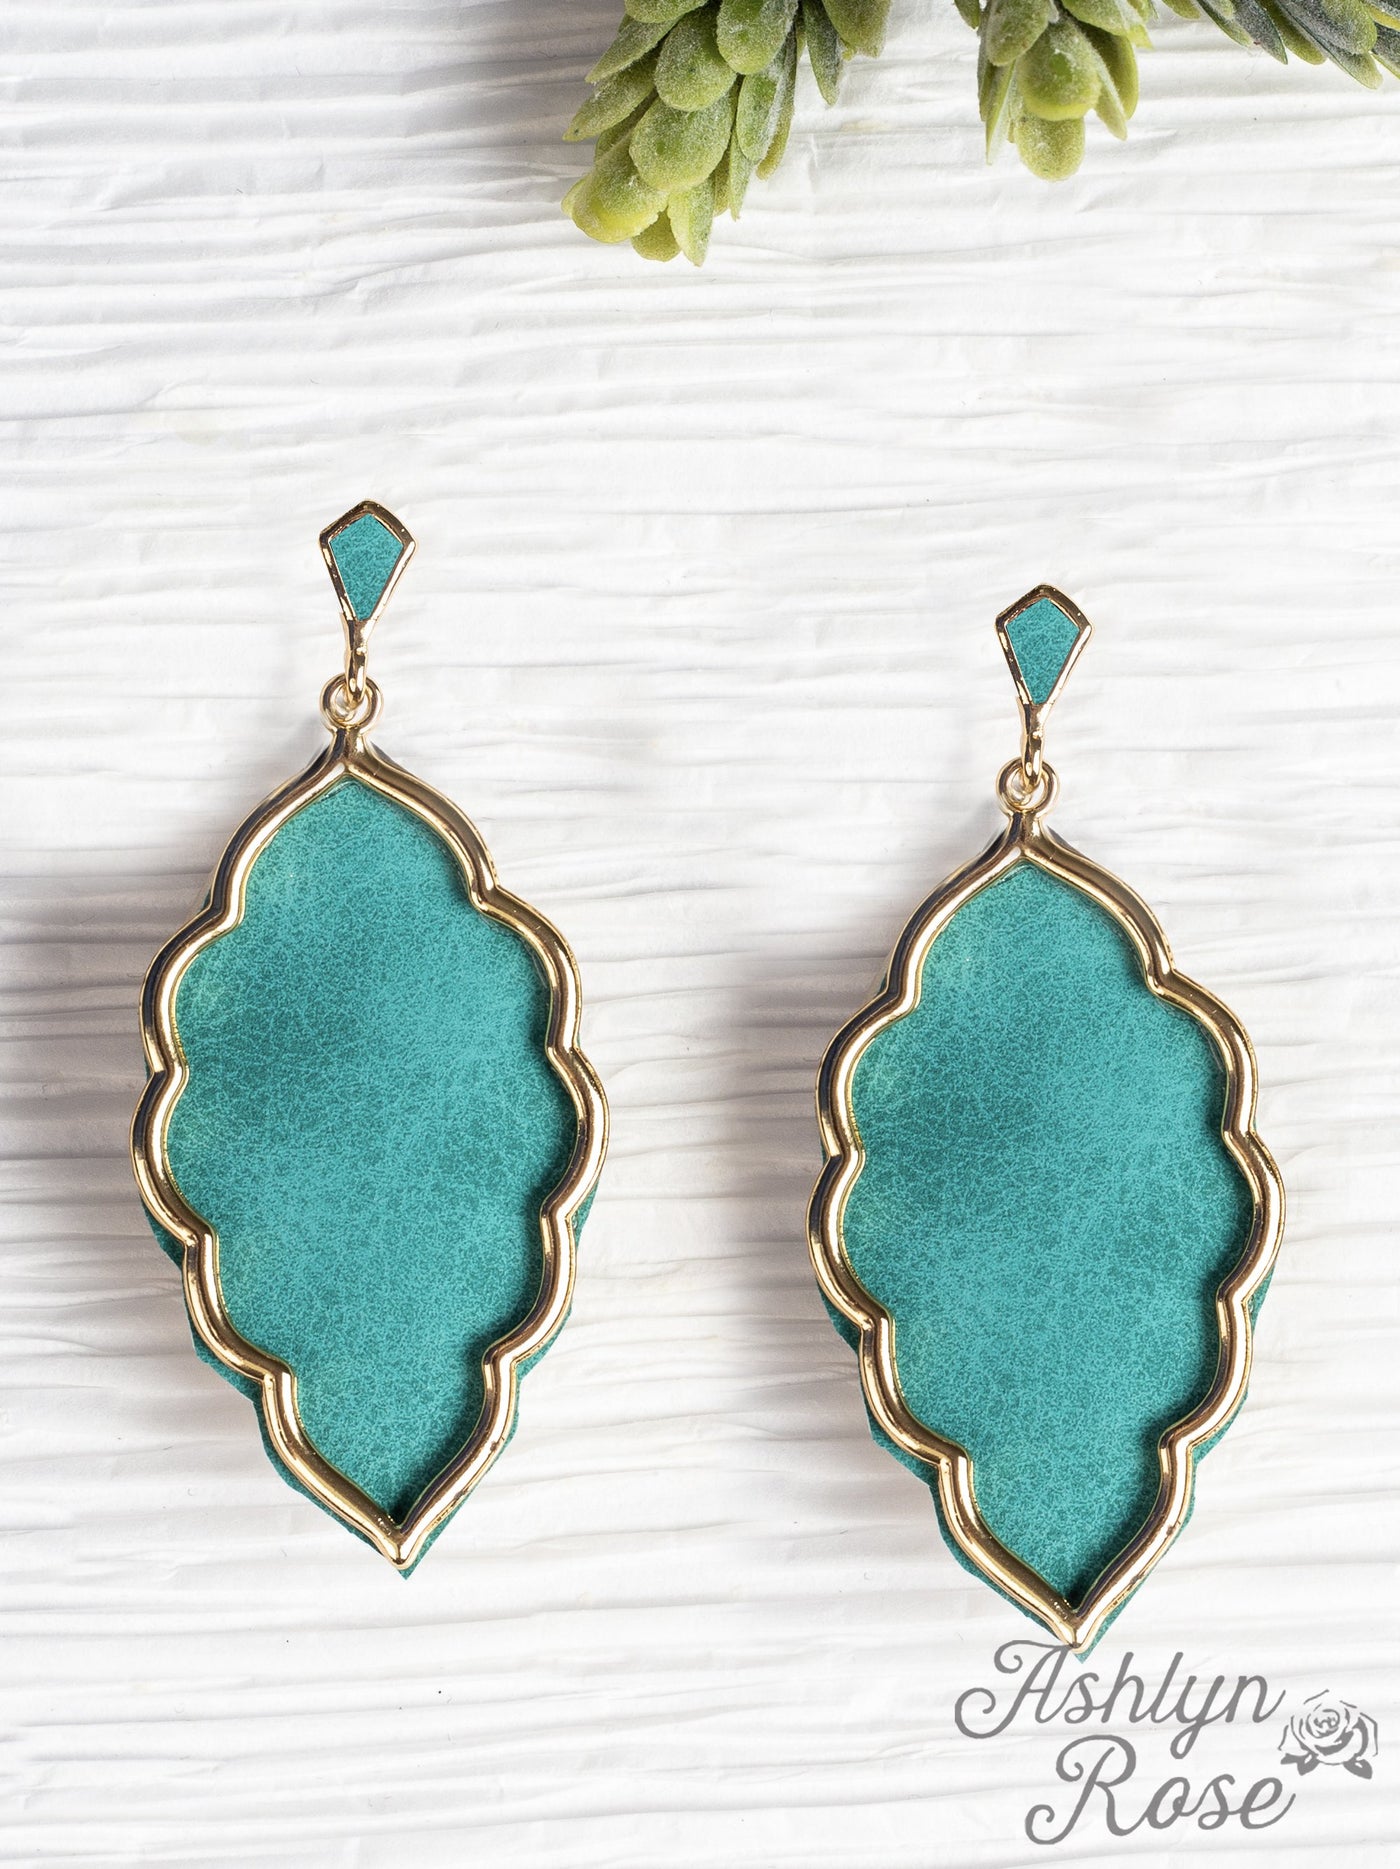 Let's Fall in Love Rain Drop Earrings with Gold Casing, Turquoise